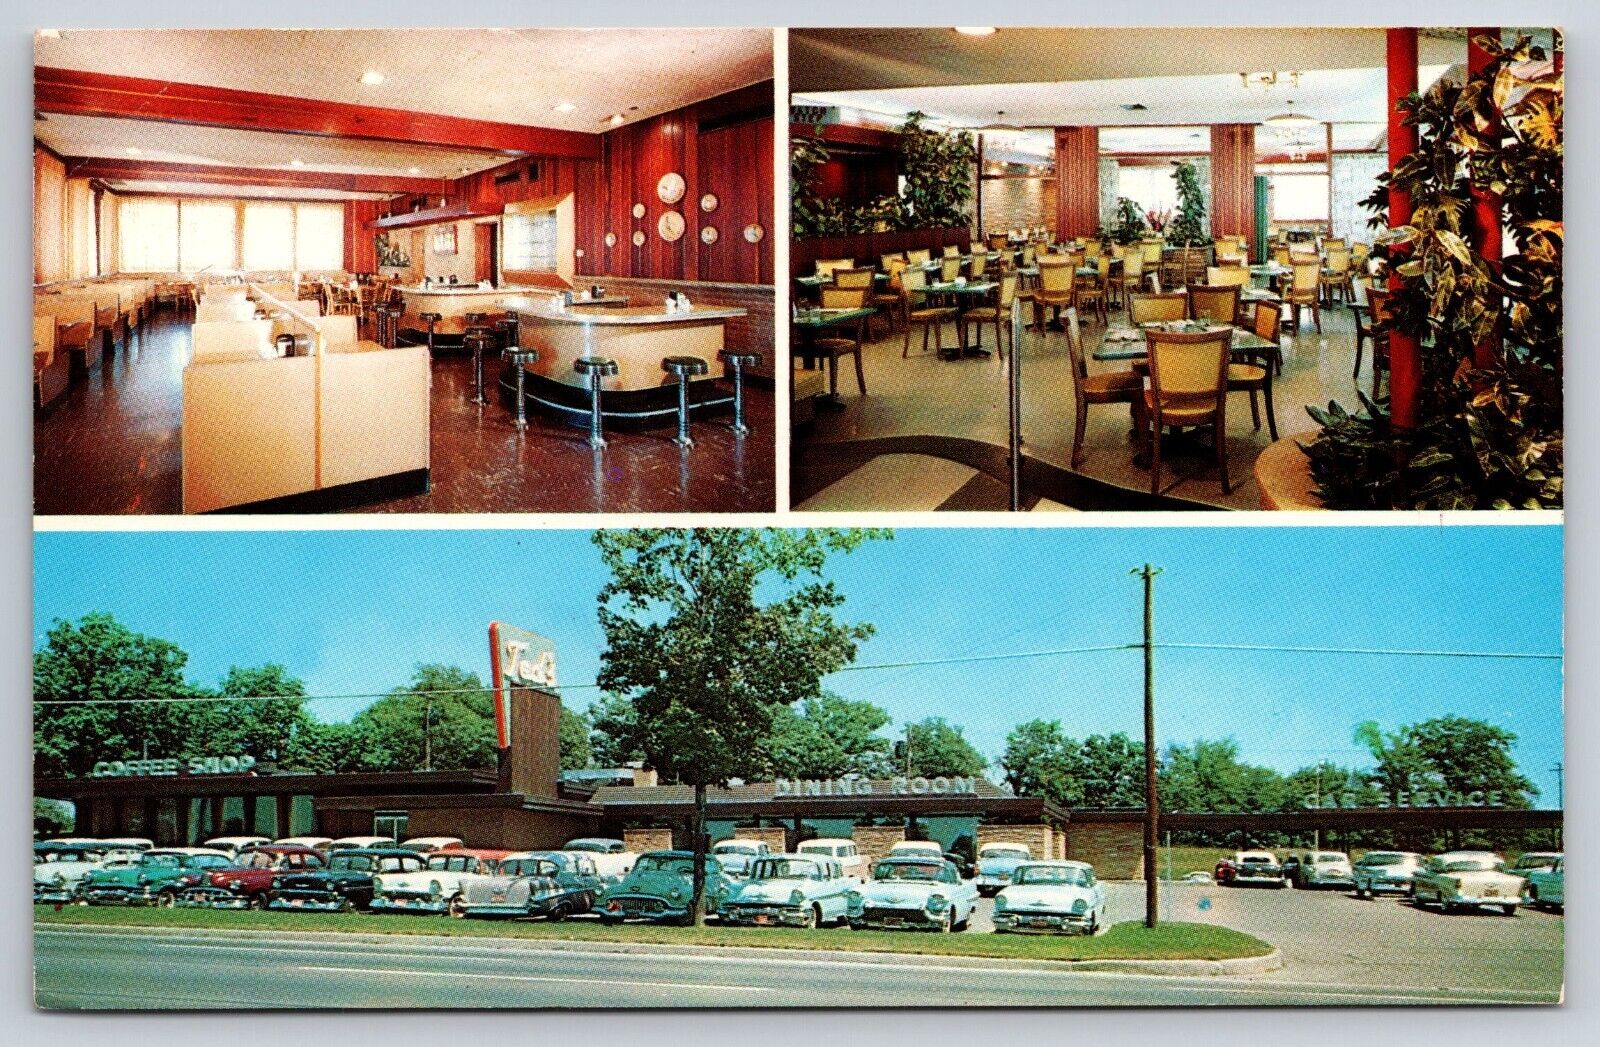 Ted's Drive In Restaurant Multi View Bloomfield Hills MI c1950s Vtg Postcard A3